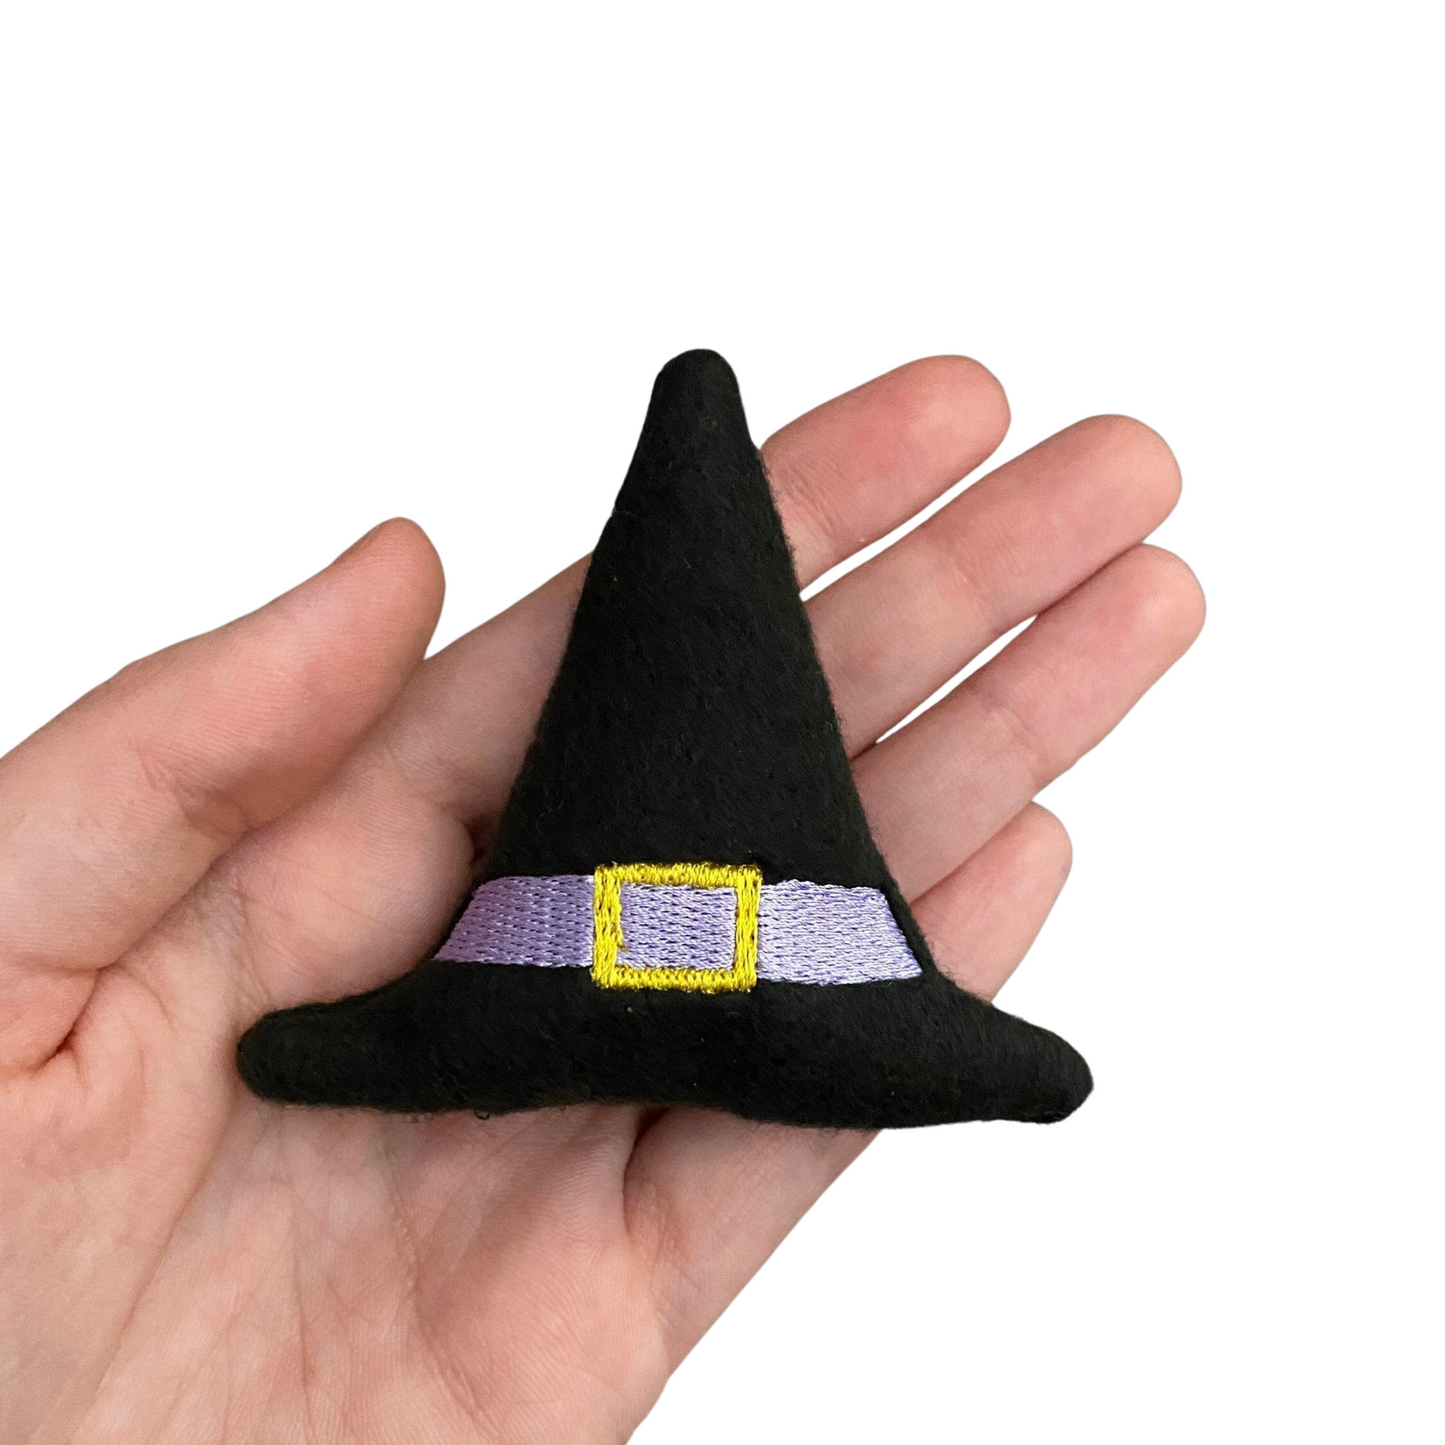 3 pack Custom Cat Toys- Halloween Personalized Cat Toy. Pumpkin, Ghost, and Witch hat Catnip Cat Toys